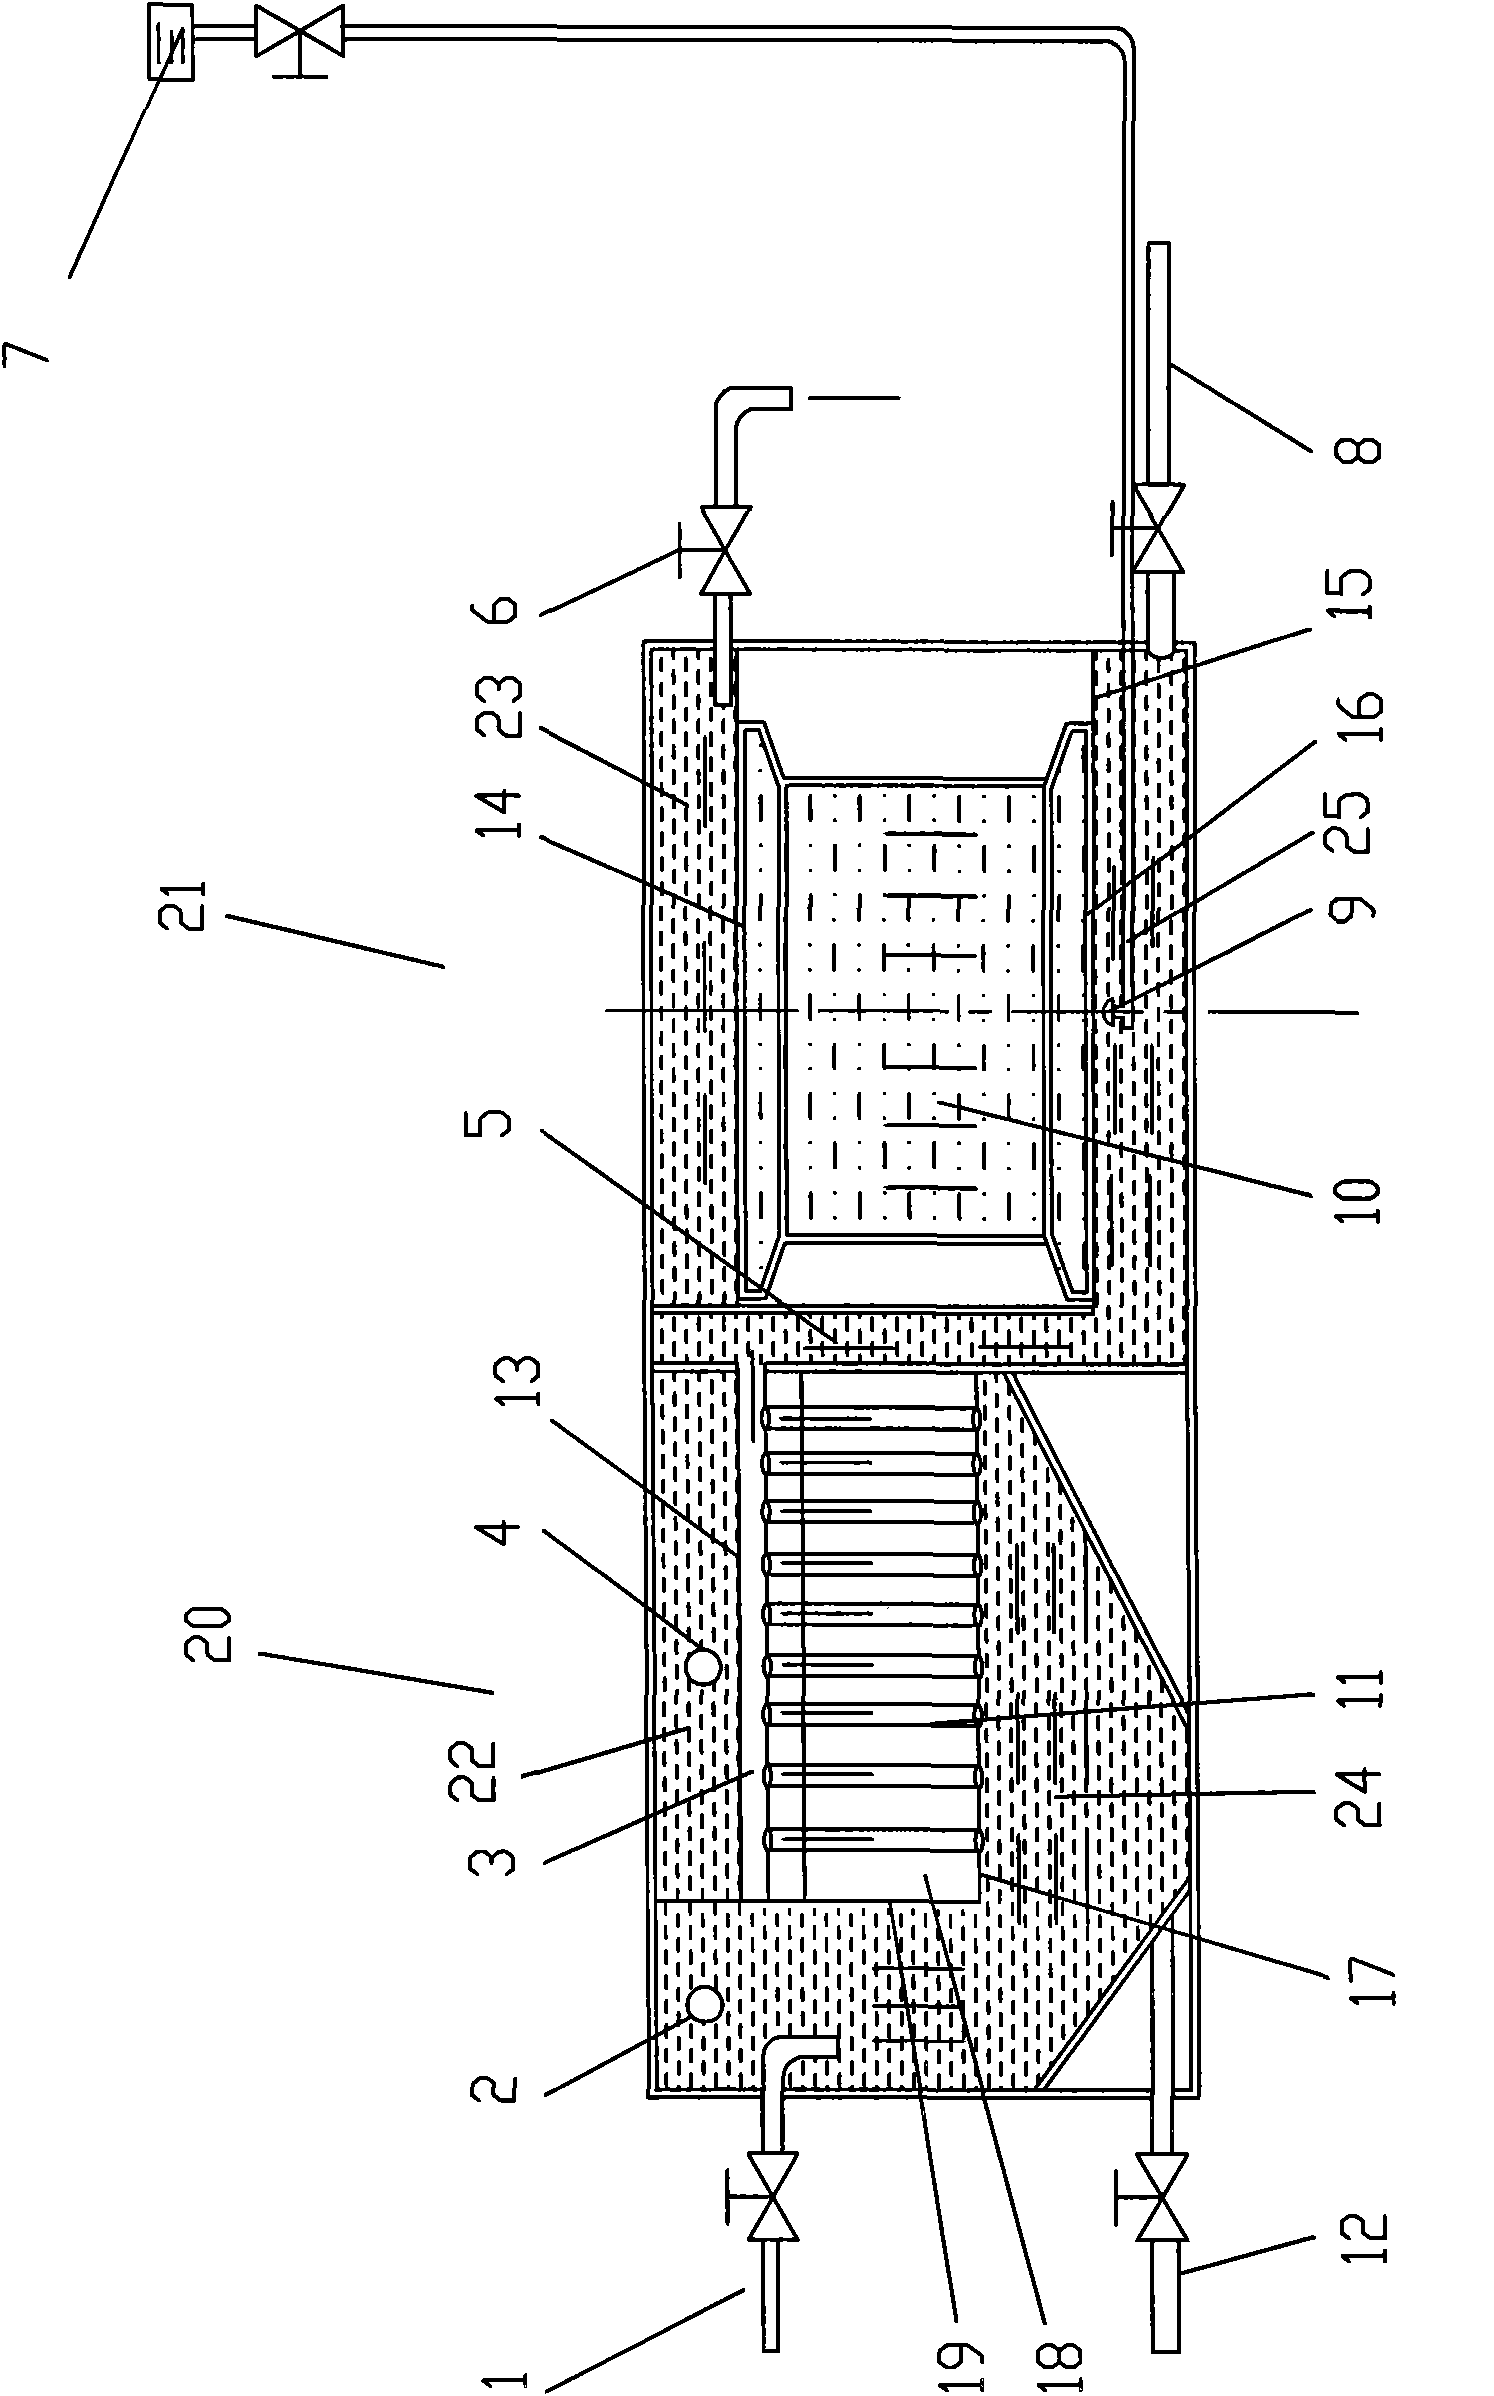 Micro-aerated biological filter